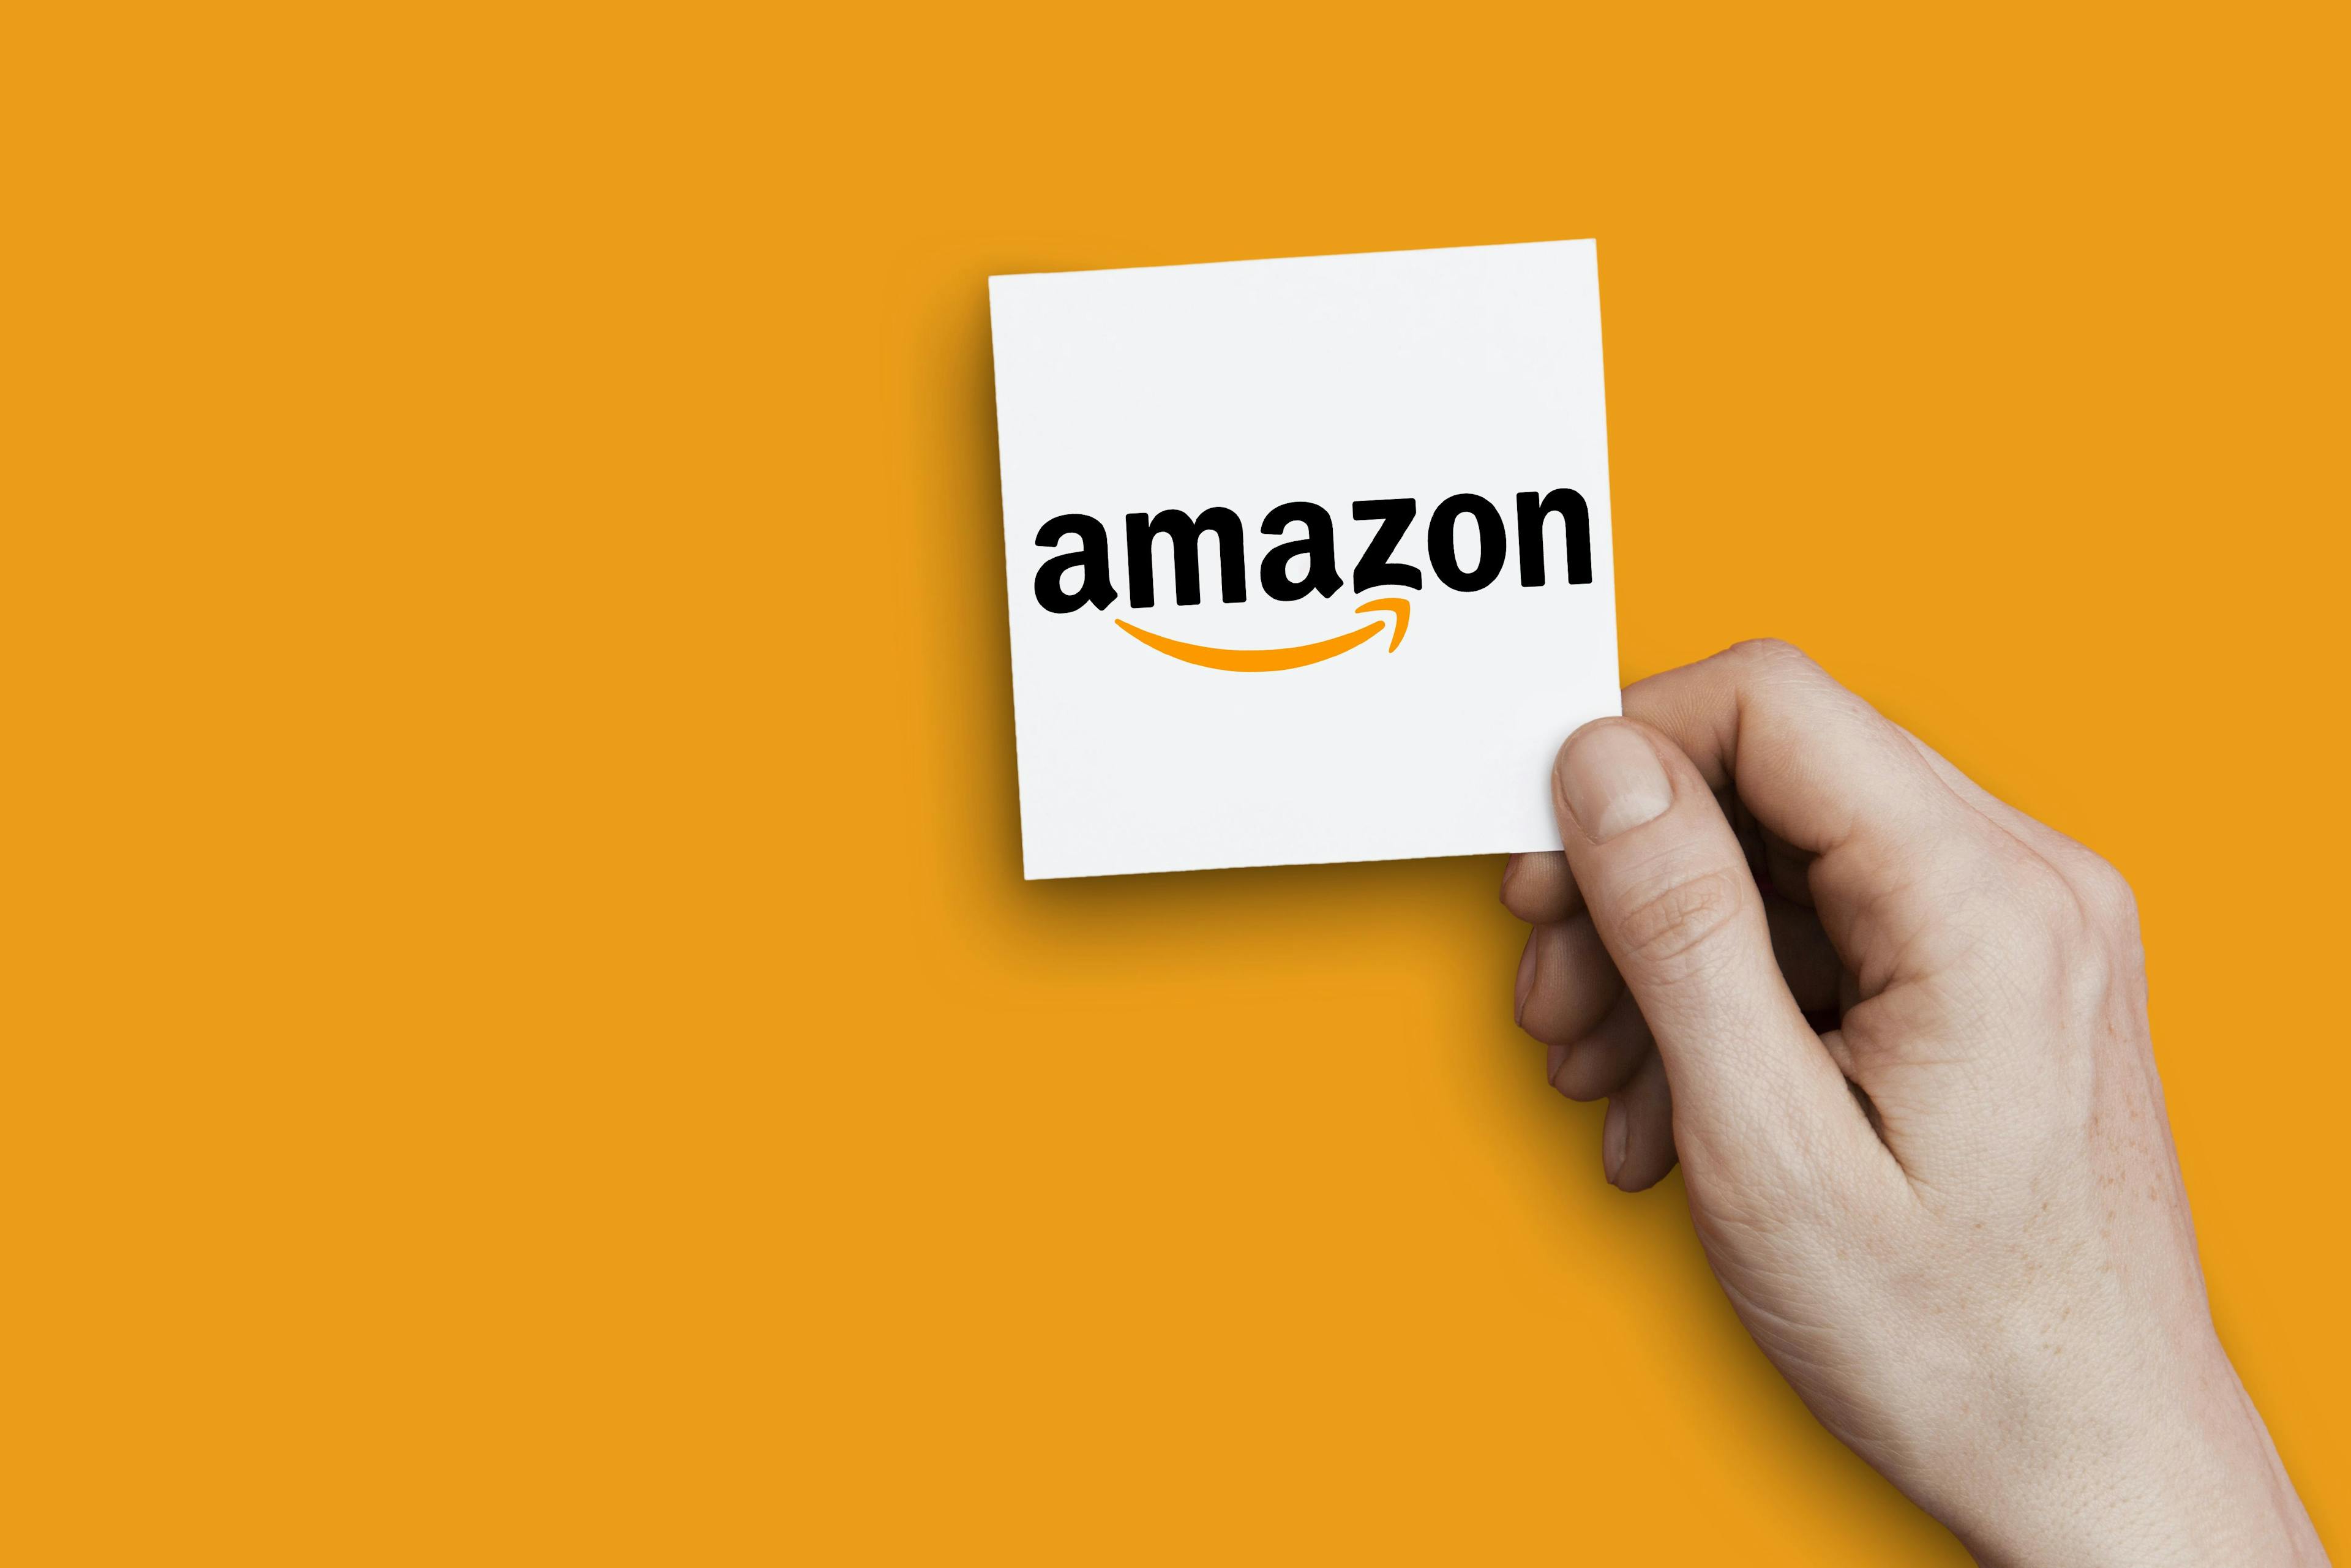 Amazon acquires membership-based primary care company One Medical for $3.9 billion